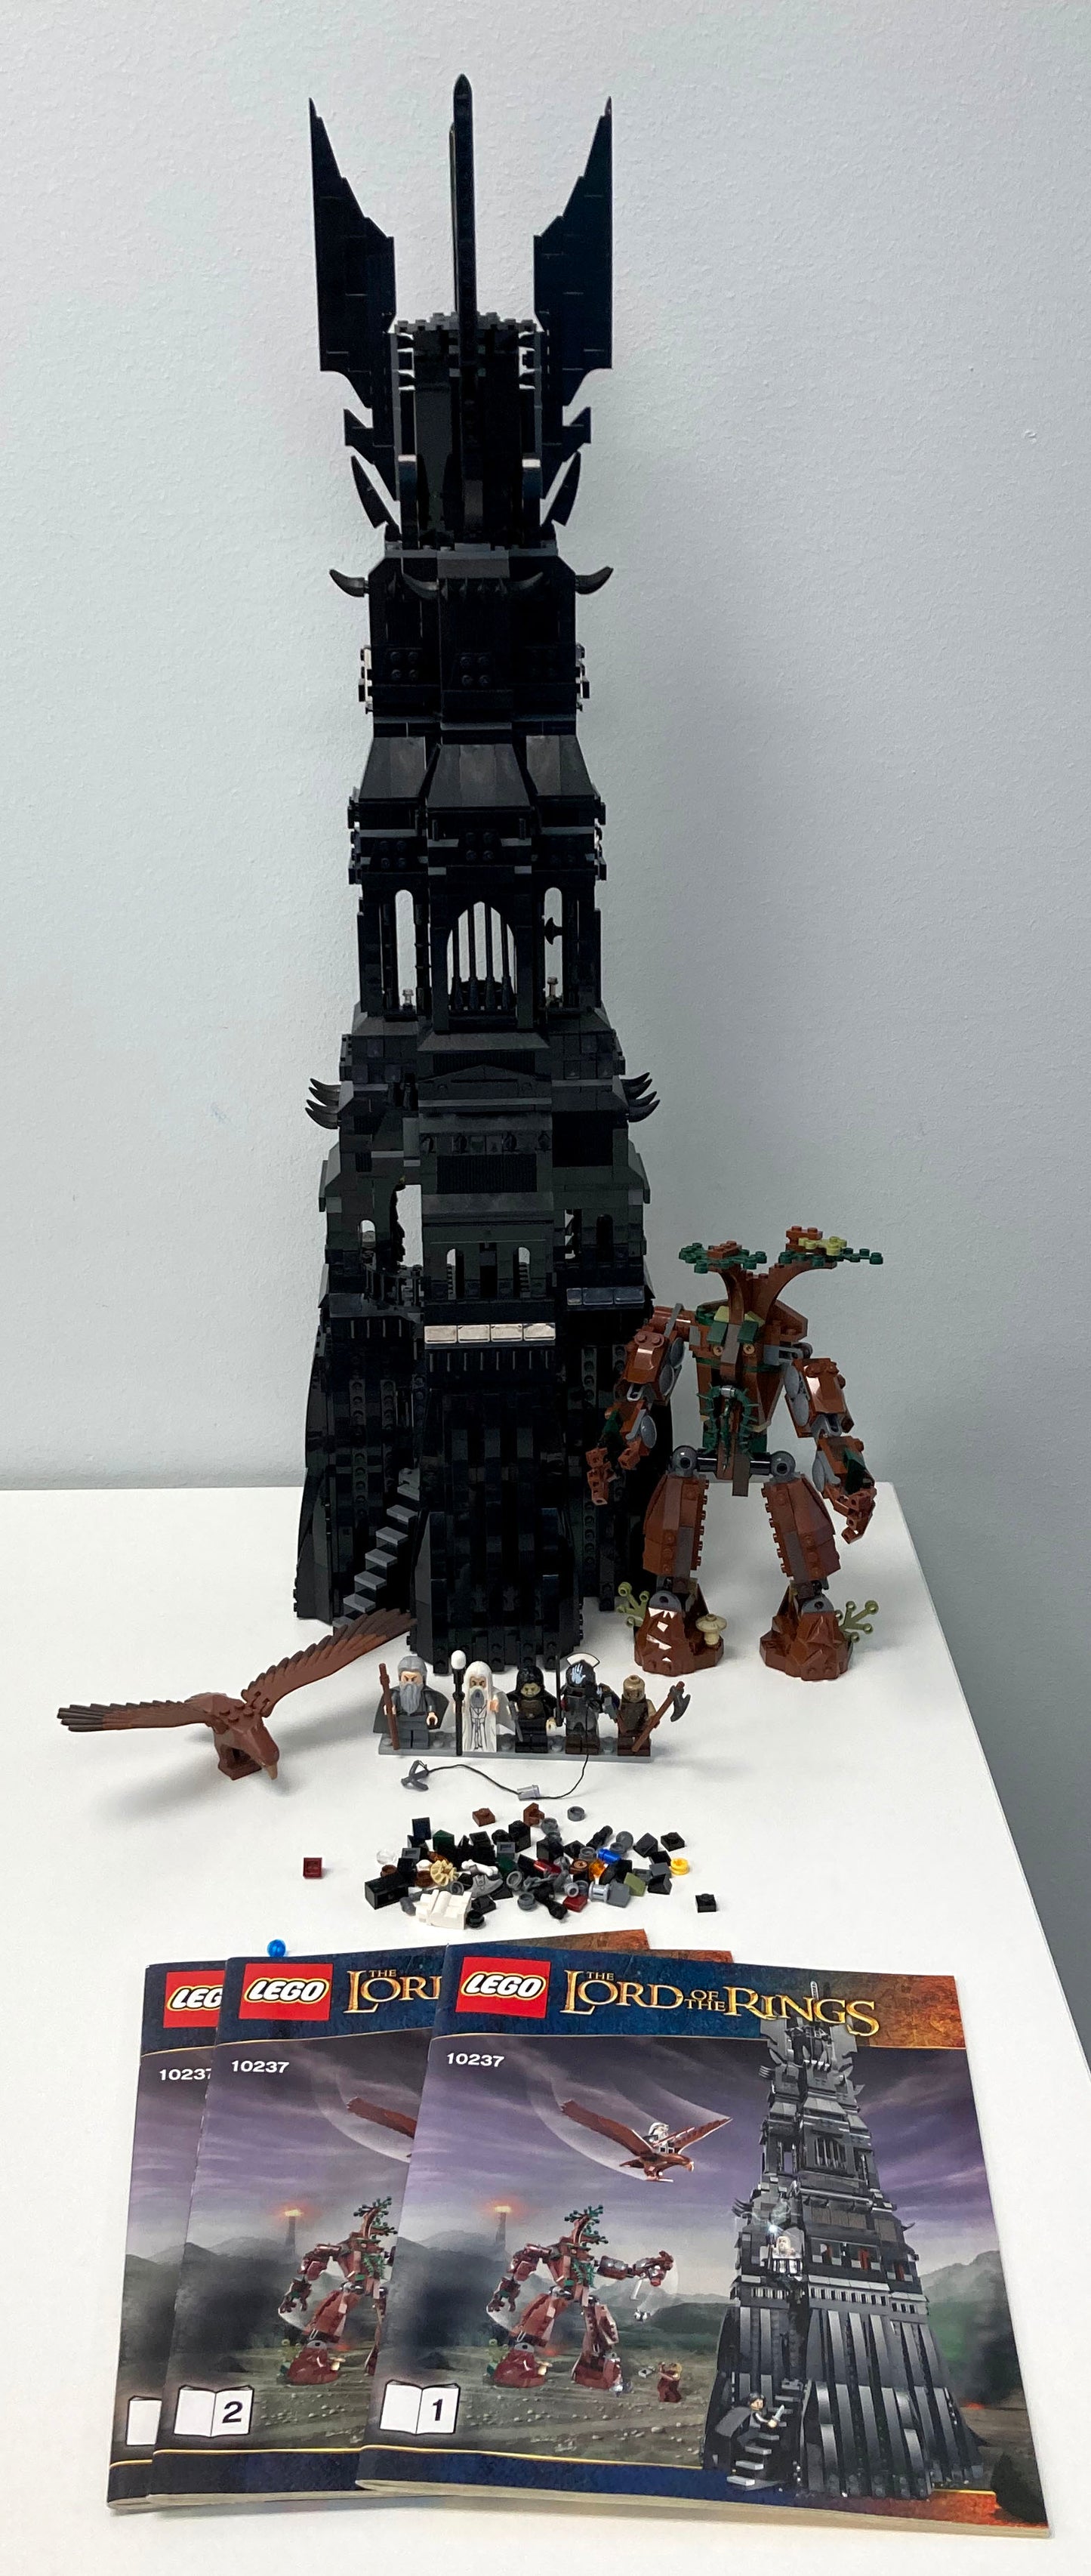 Used Set 10237 Tower of Orthanc (with Instruction Manuals, No Box) (IN-STORE PICKUP ONLY)